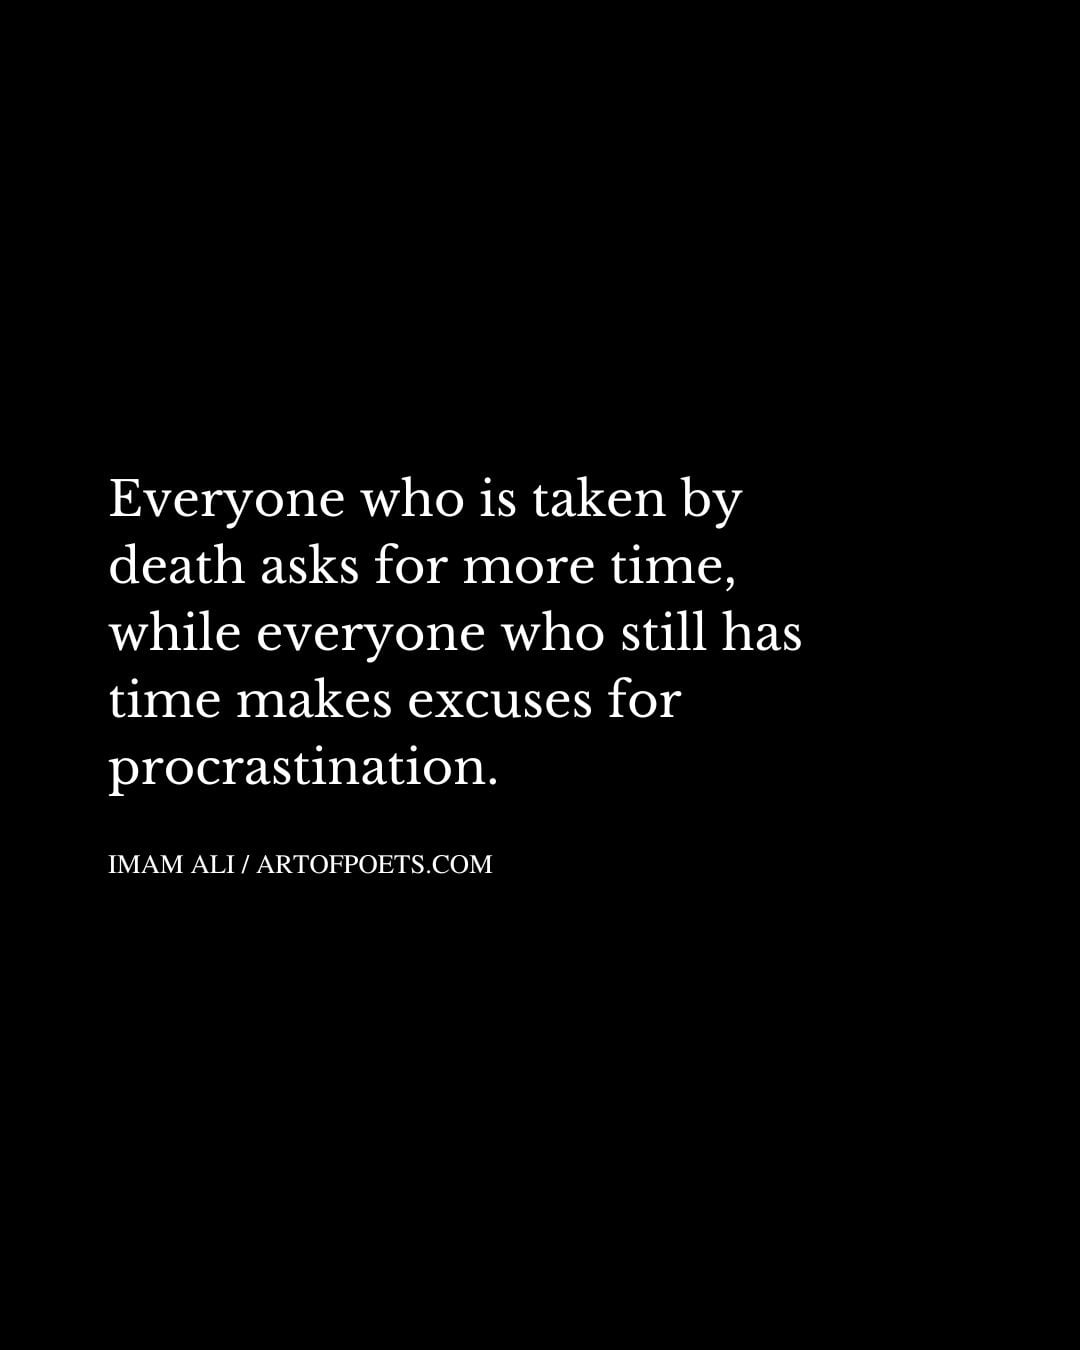 Everyone who is taken by death asks for more time while everyone who still has time makes excuses for procrastination